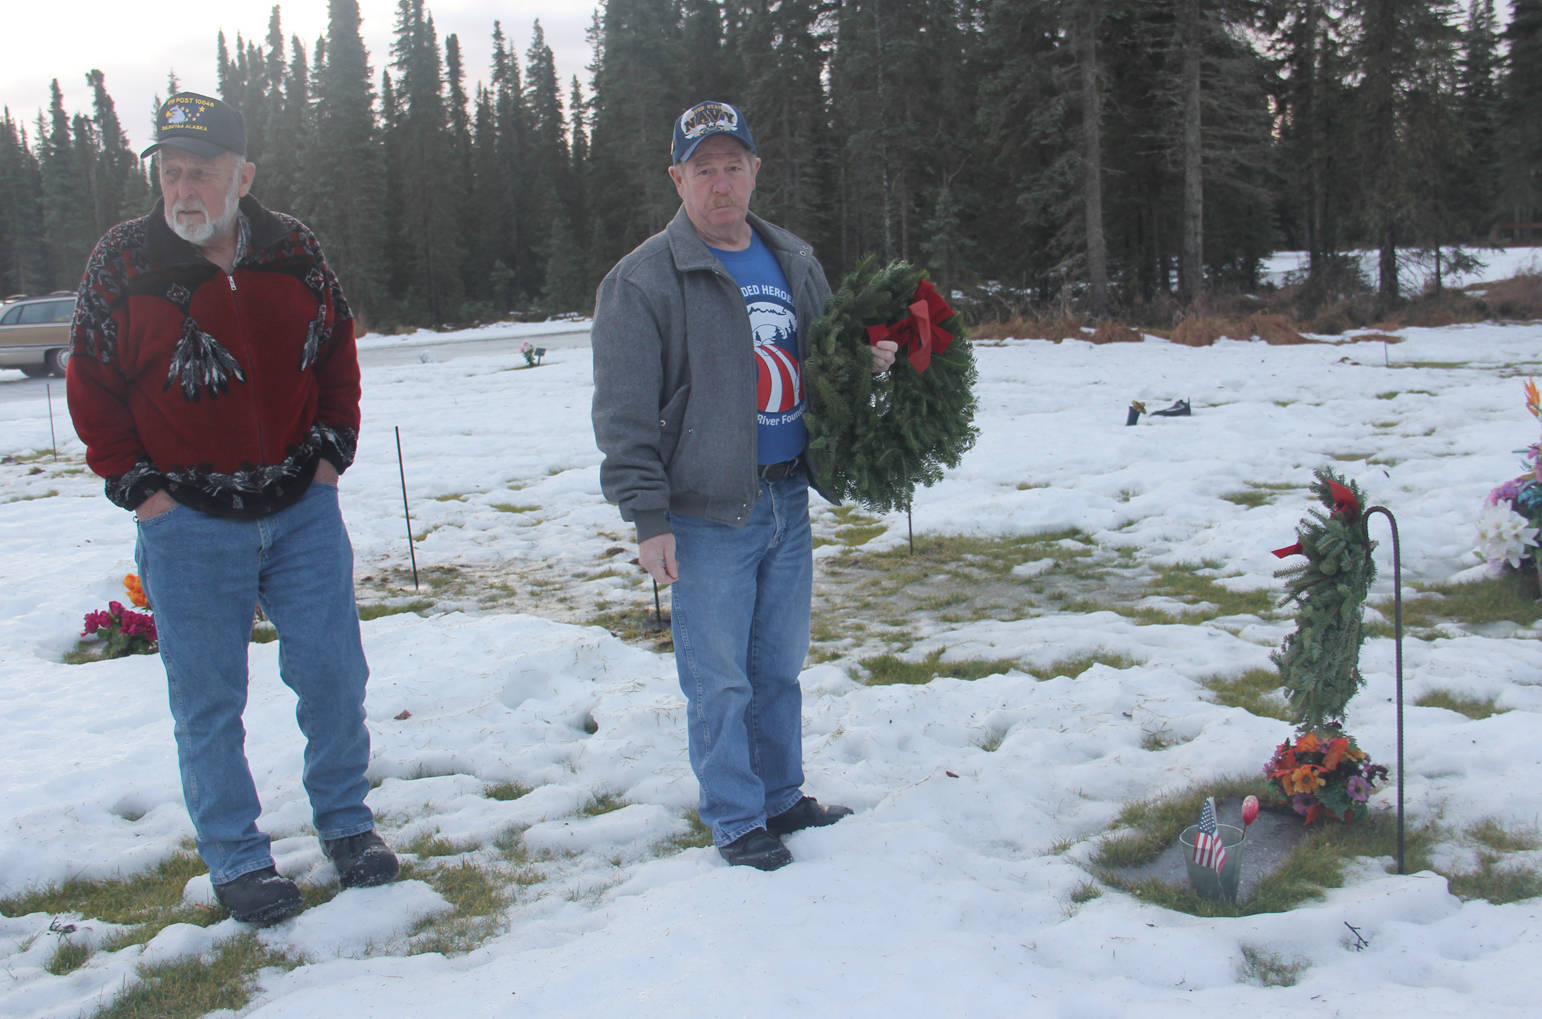 With a mission to remember, honor and teach veterans lay wreaths on the graves of fallen soldiers in Soldotna and Kenai.